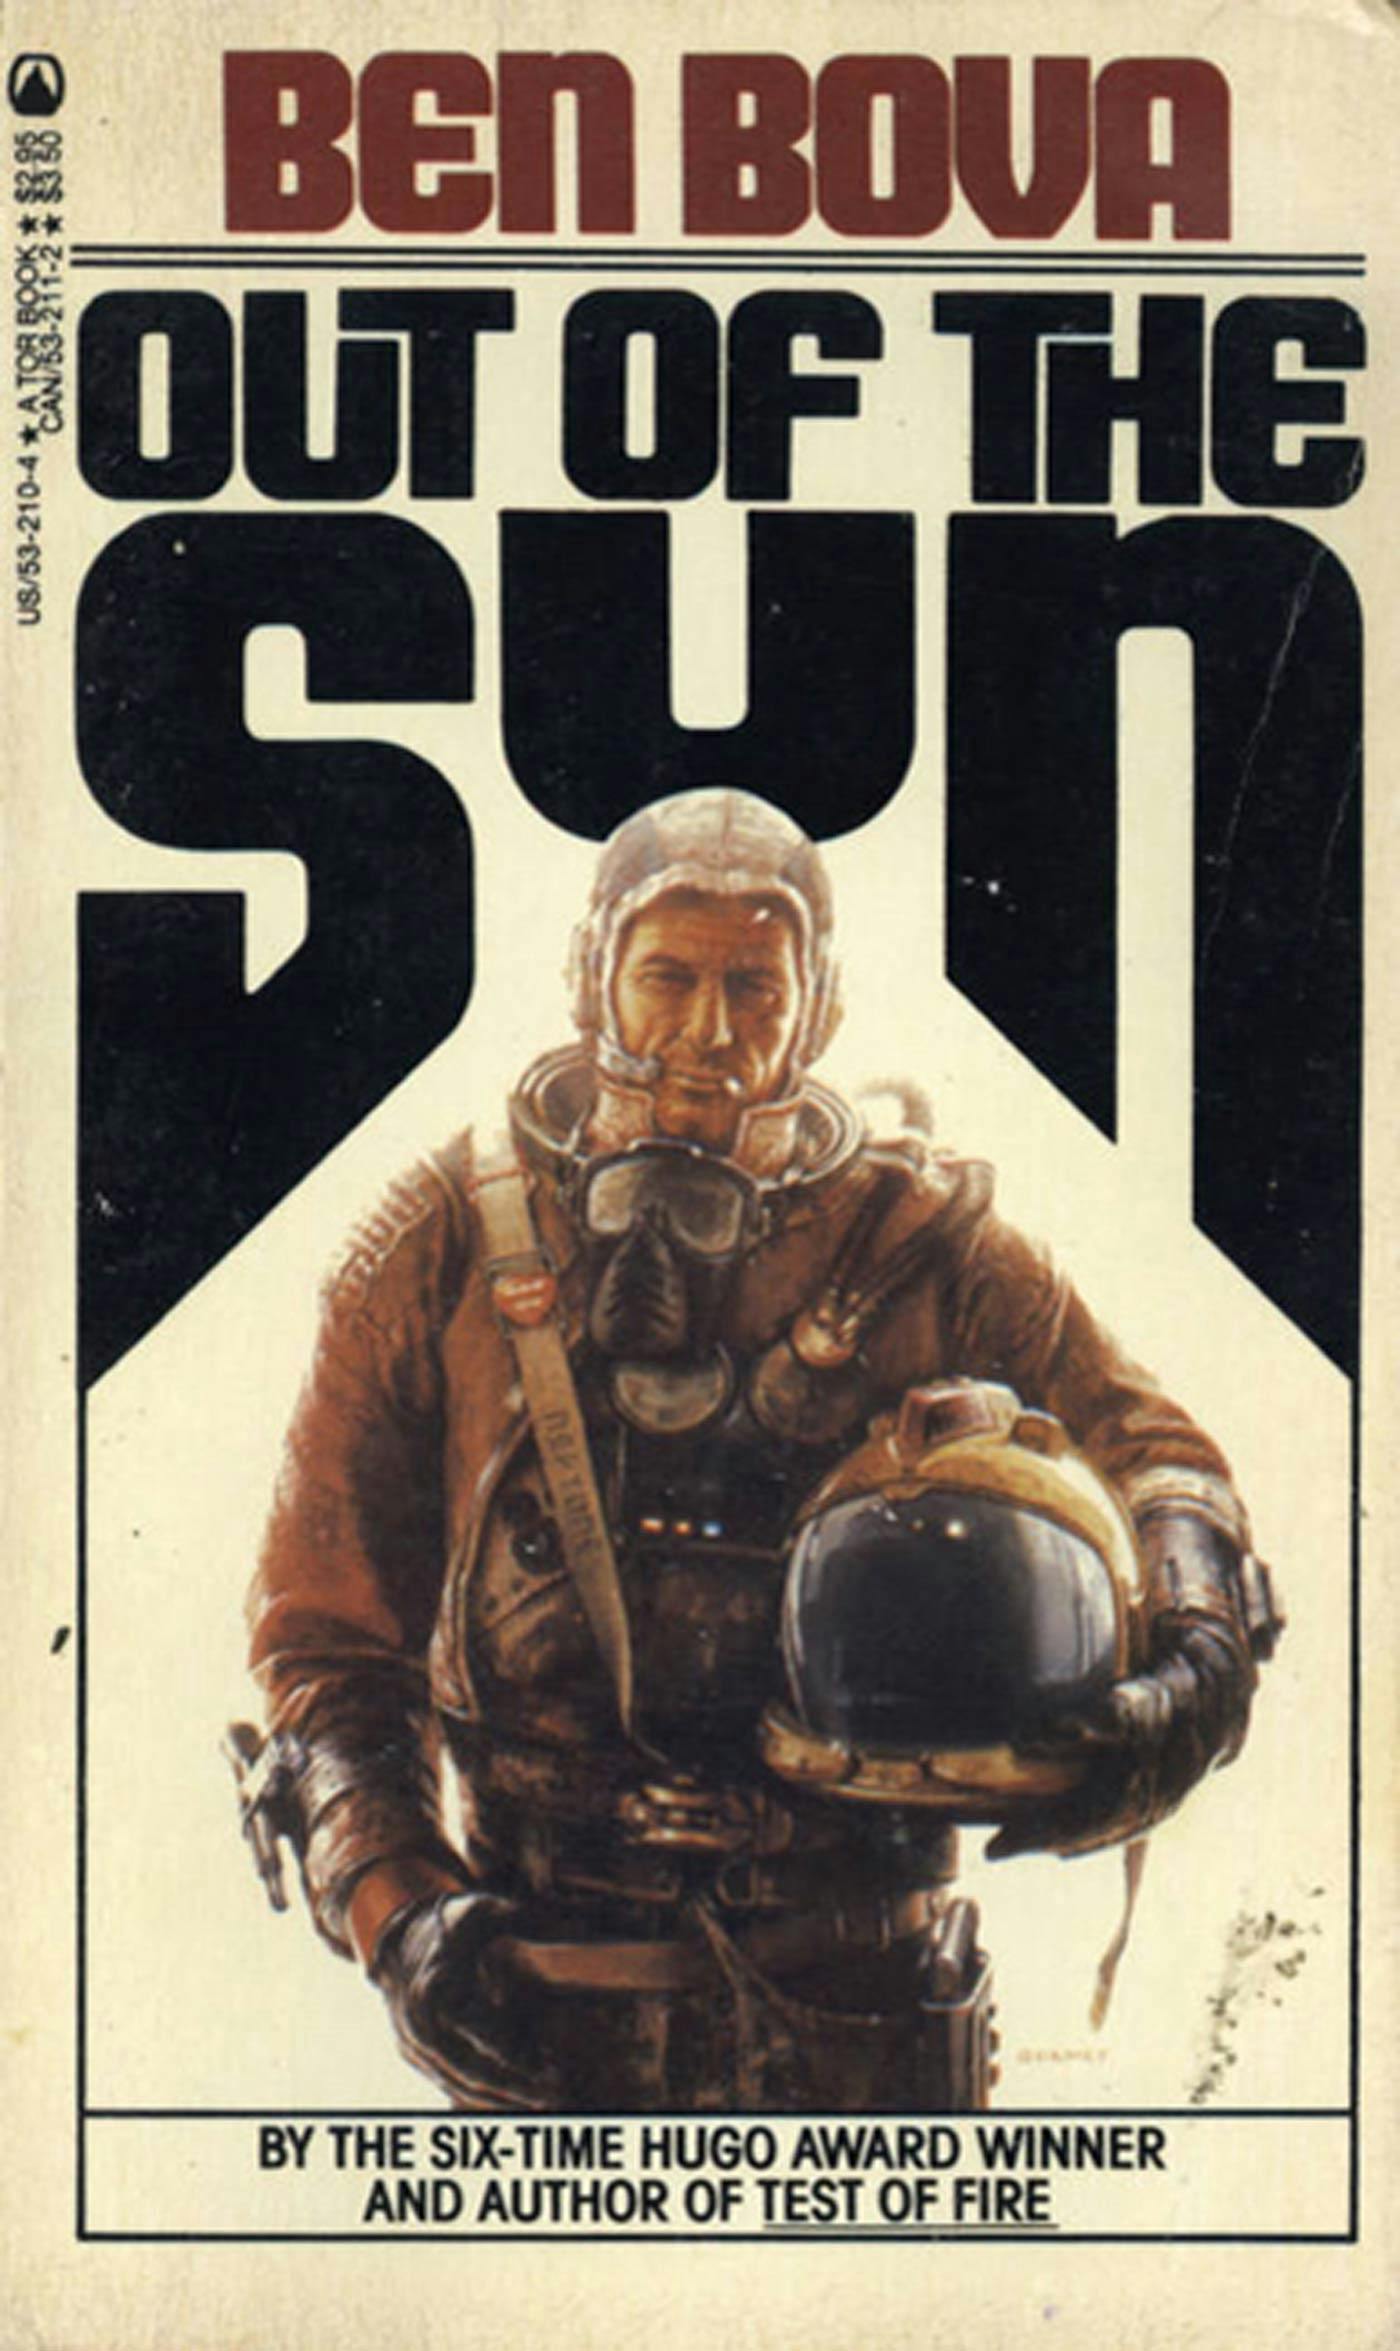 Cover for the book titled as: Out of the Sun